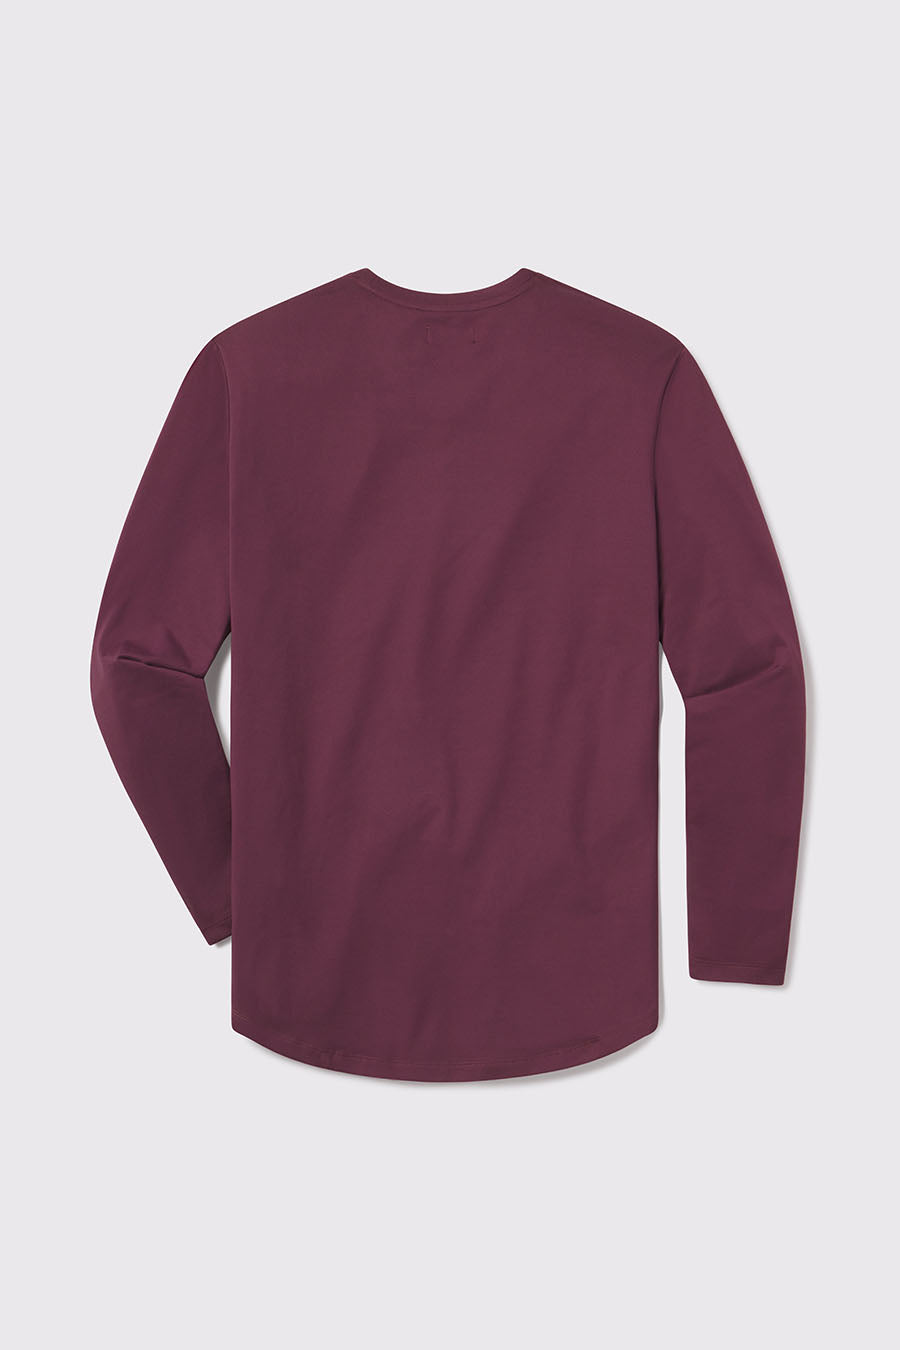 Havok Long Sleeve - Currant - photo from back flat lay #color_currant